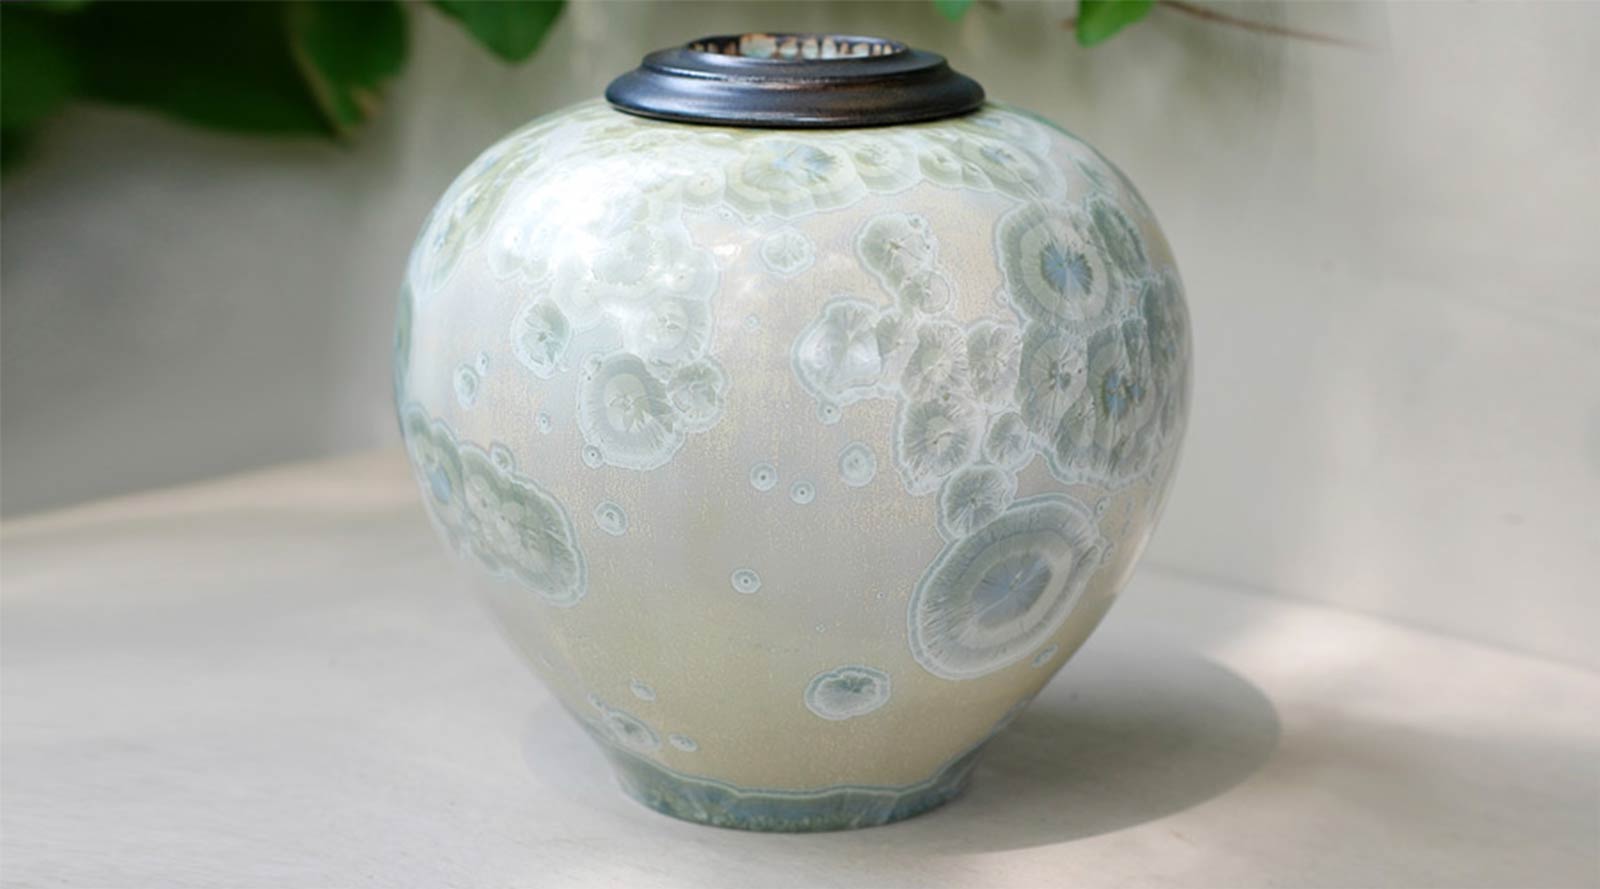 Beryl Adult Cremation Urns for Ashes